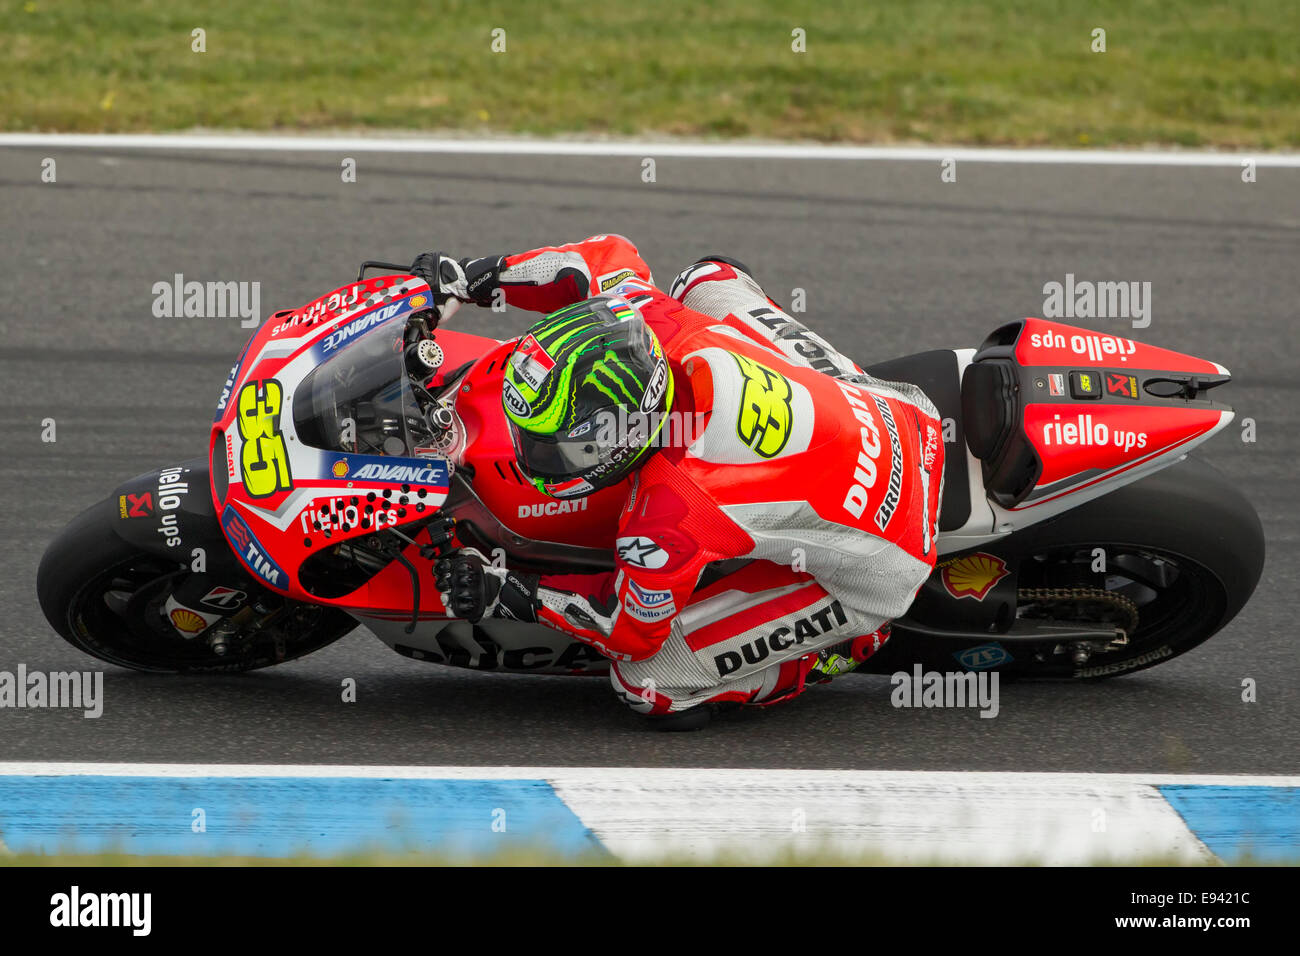 Phillip Island, Victoria, Australia. Sunday, 19 October, 2014. Britain's Cal Crutchlow during the Tissot Australian Motorcycle Grand Prix aboard his Ducati Desmosedici MotoGP machine. Crutchlow crashed out of the race in second place with just one lap remaining. Credit:  Russell Hunter/Alamy Live News Stock Photo